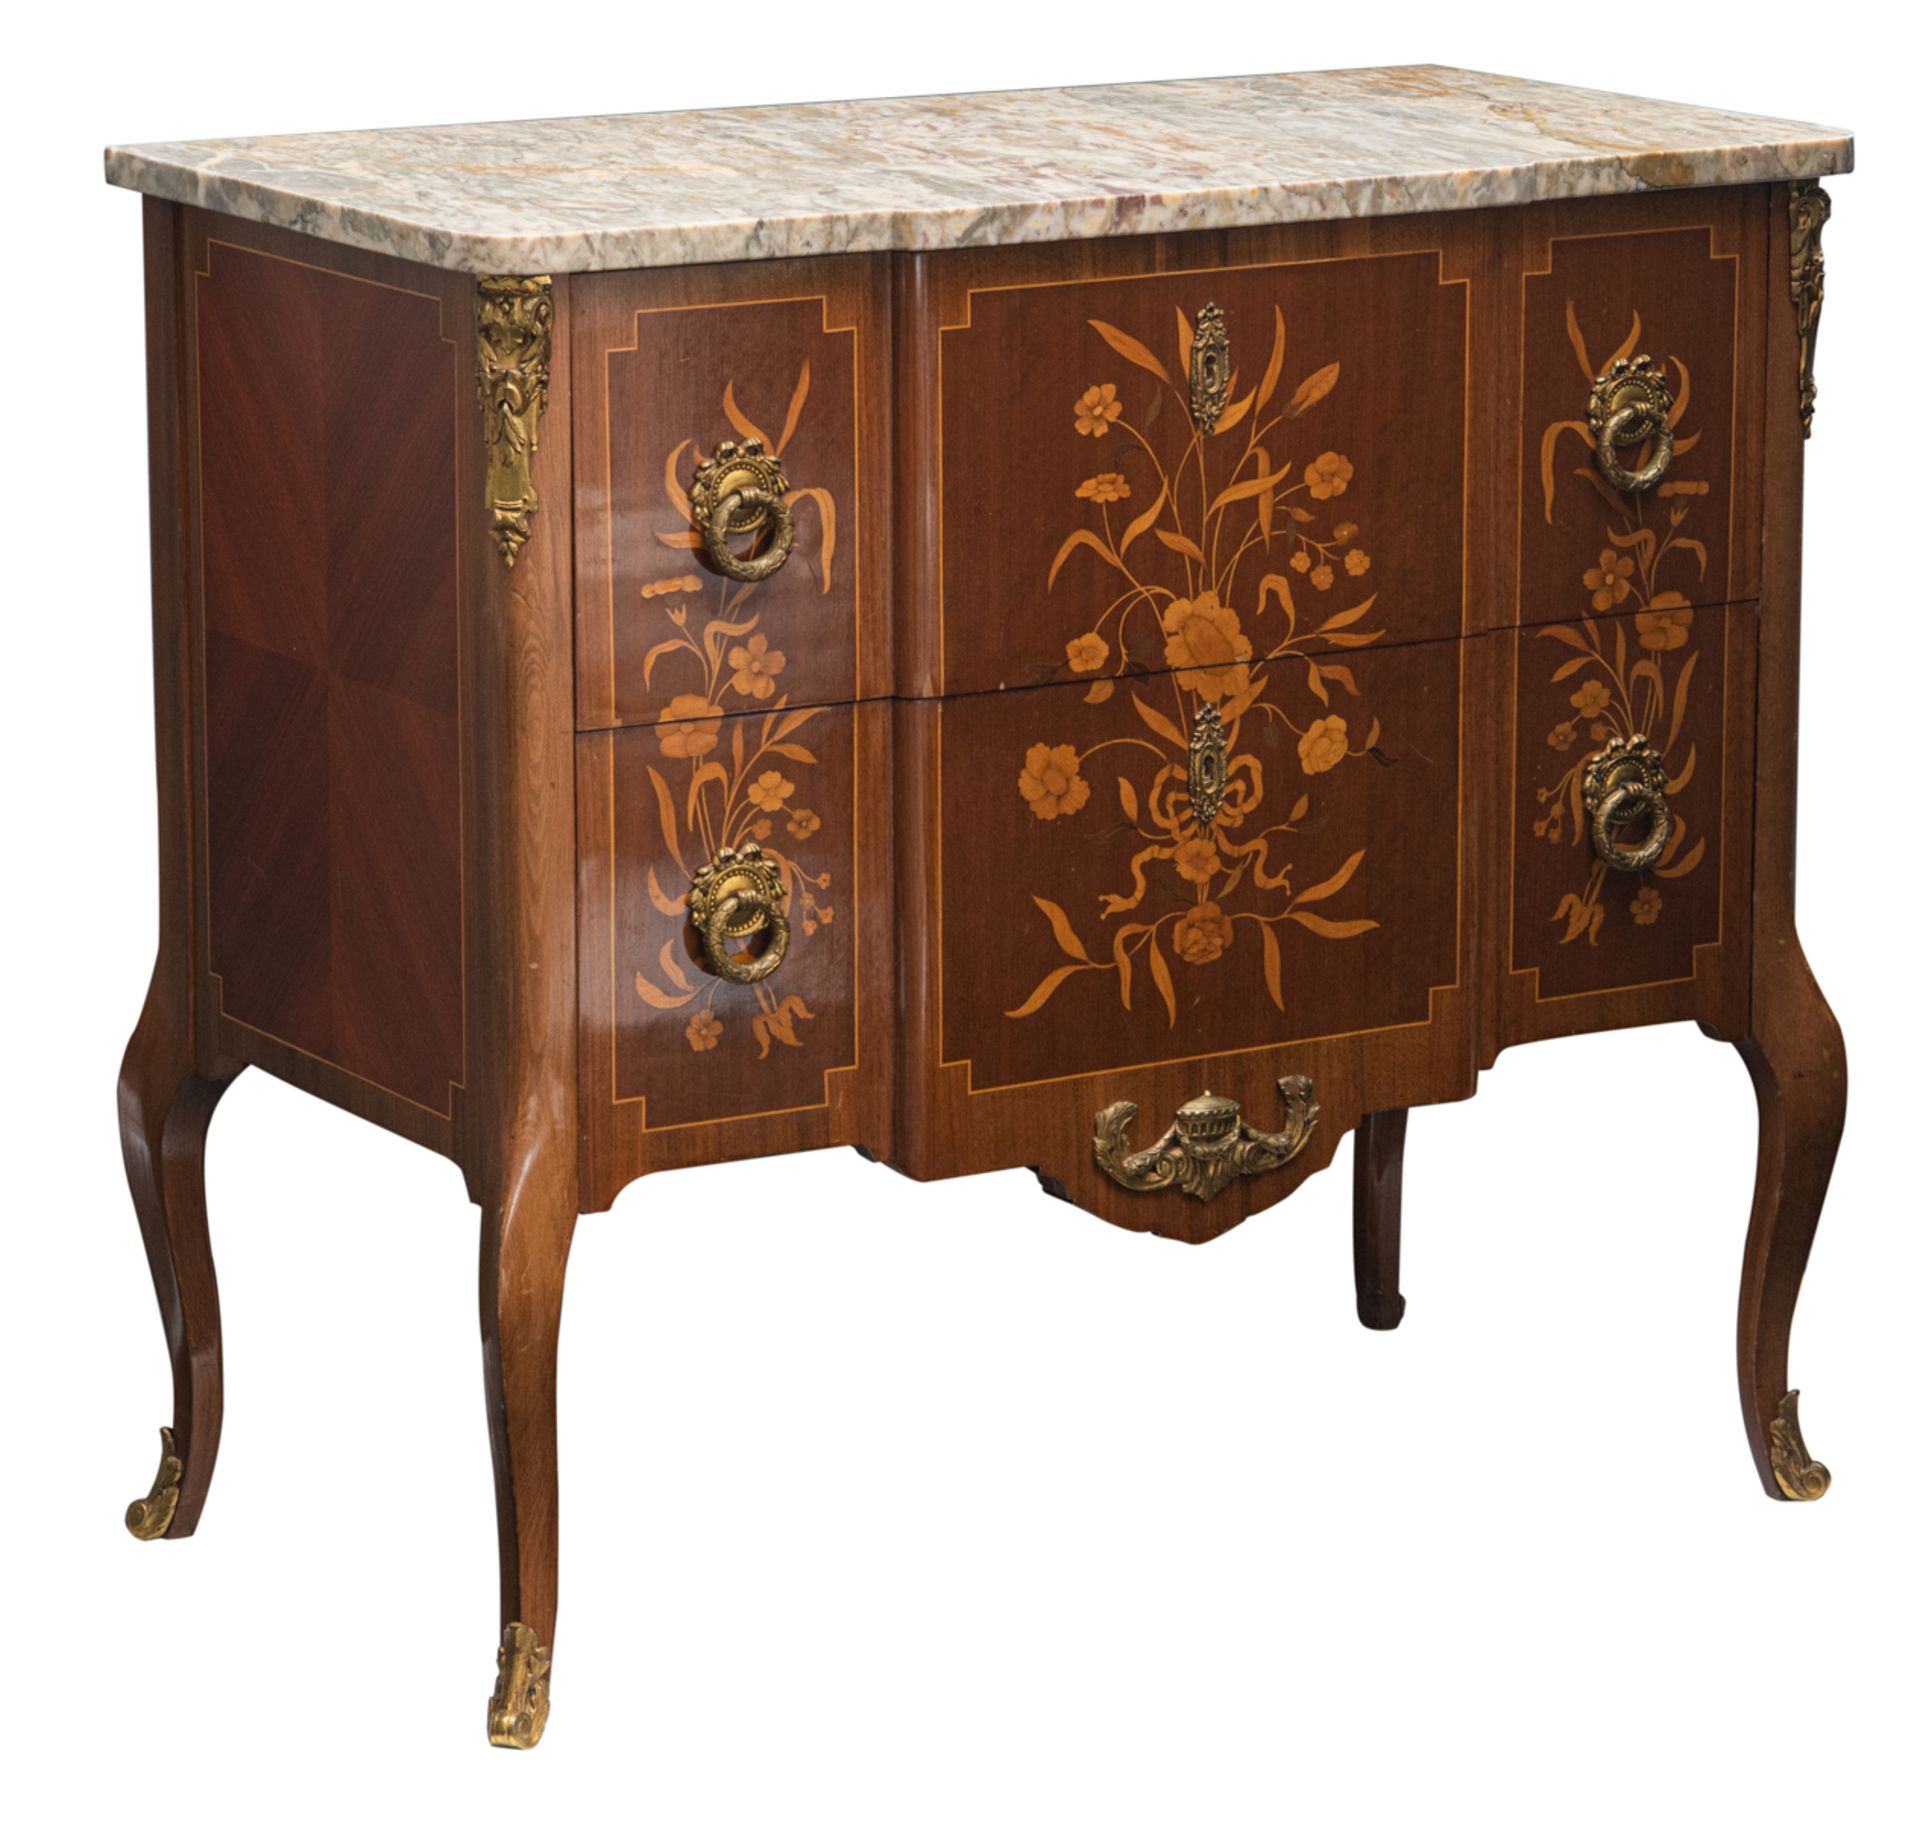 A walnut veneered French Transition style commode, with floral marquetry of cherrywood and mahogany,